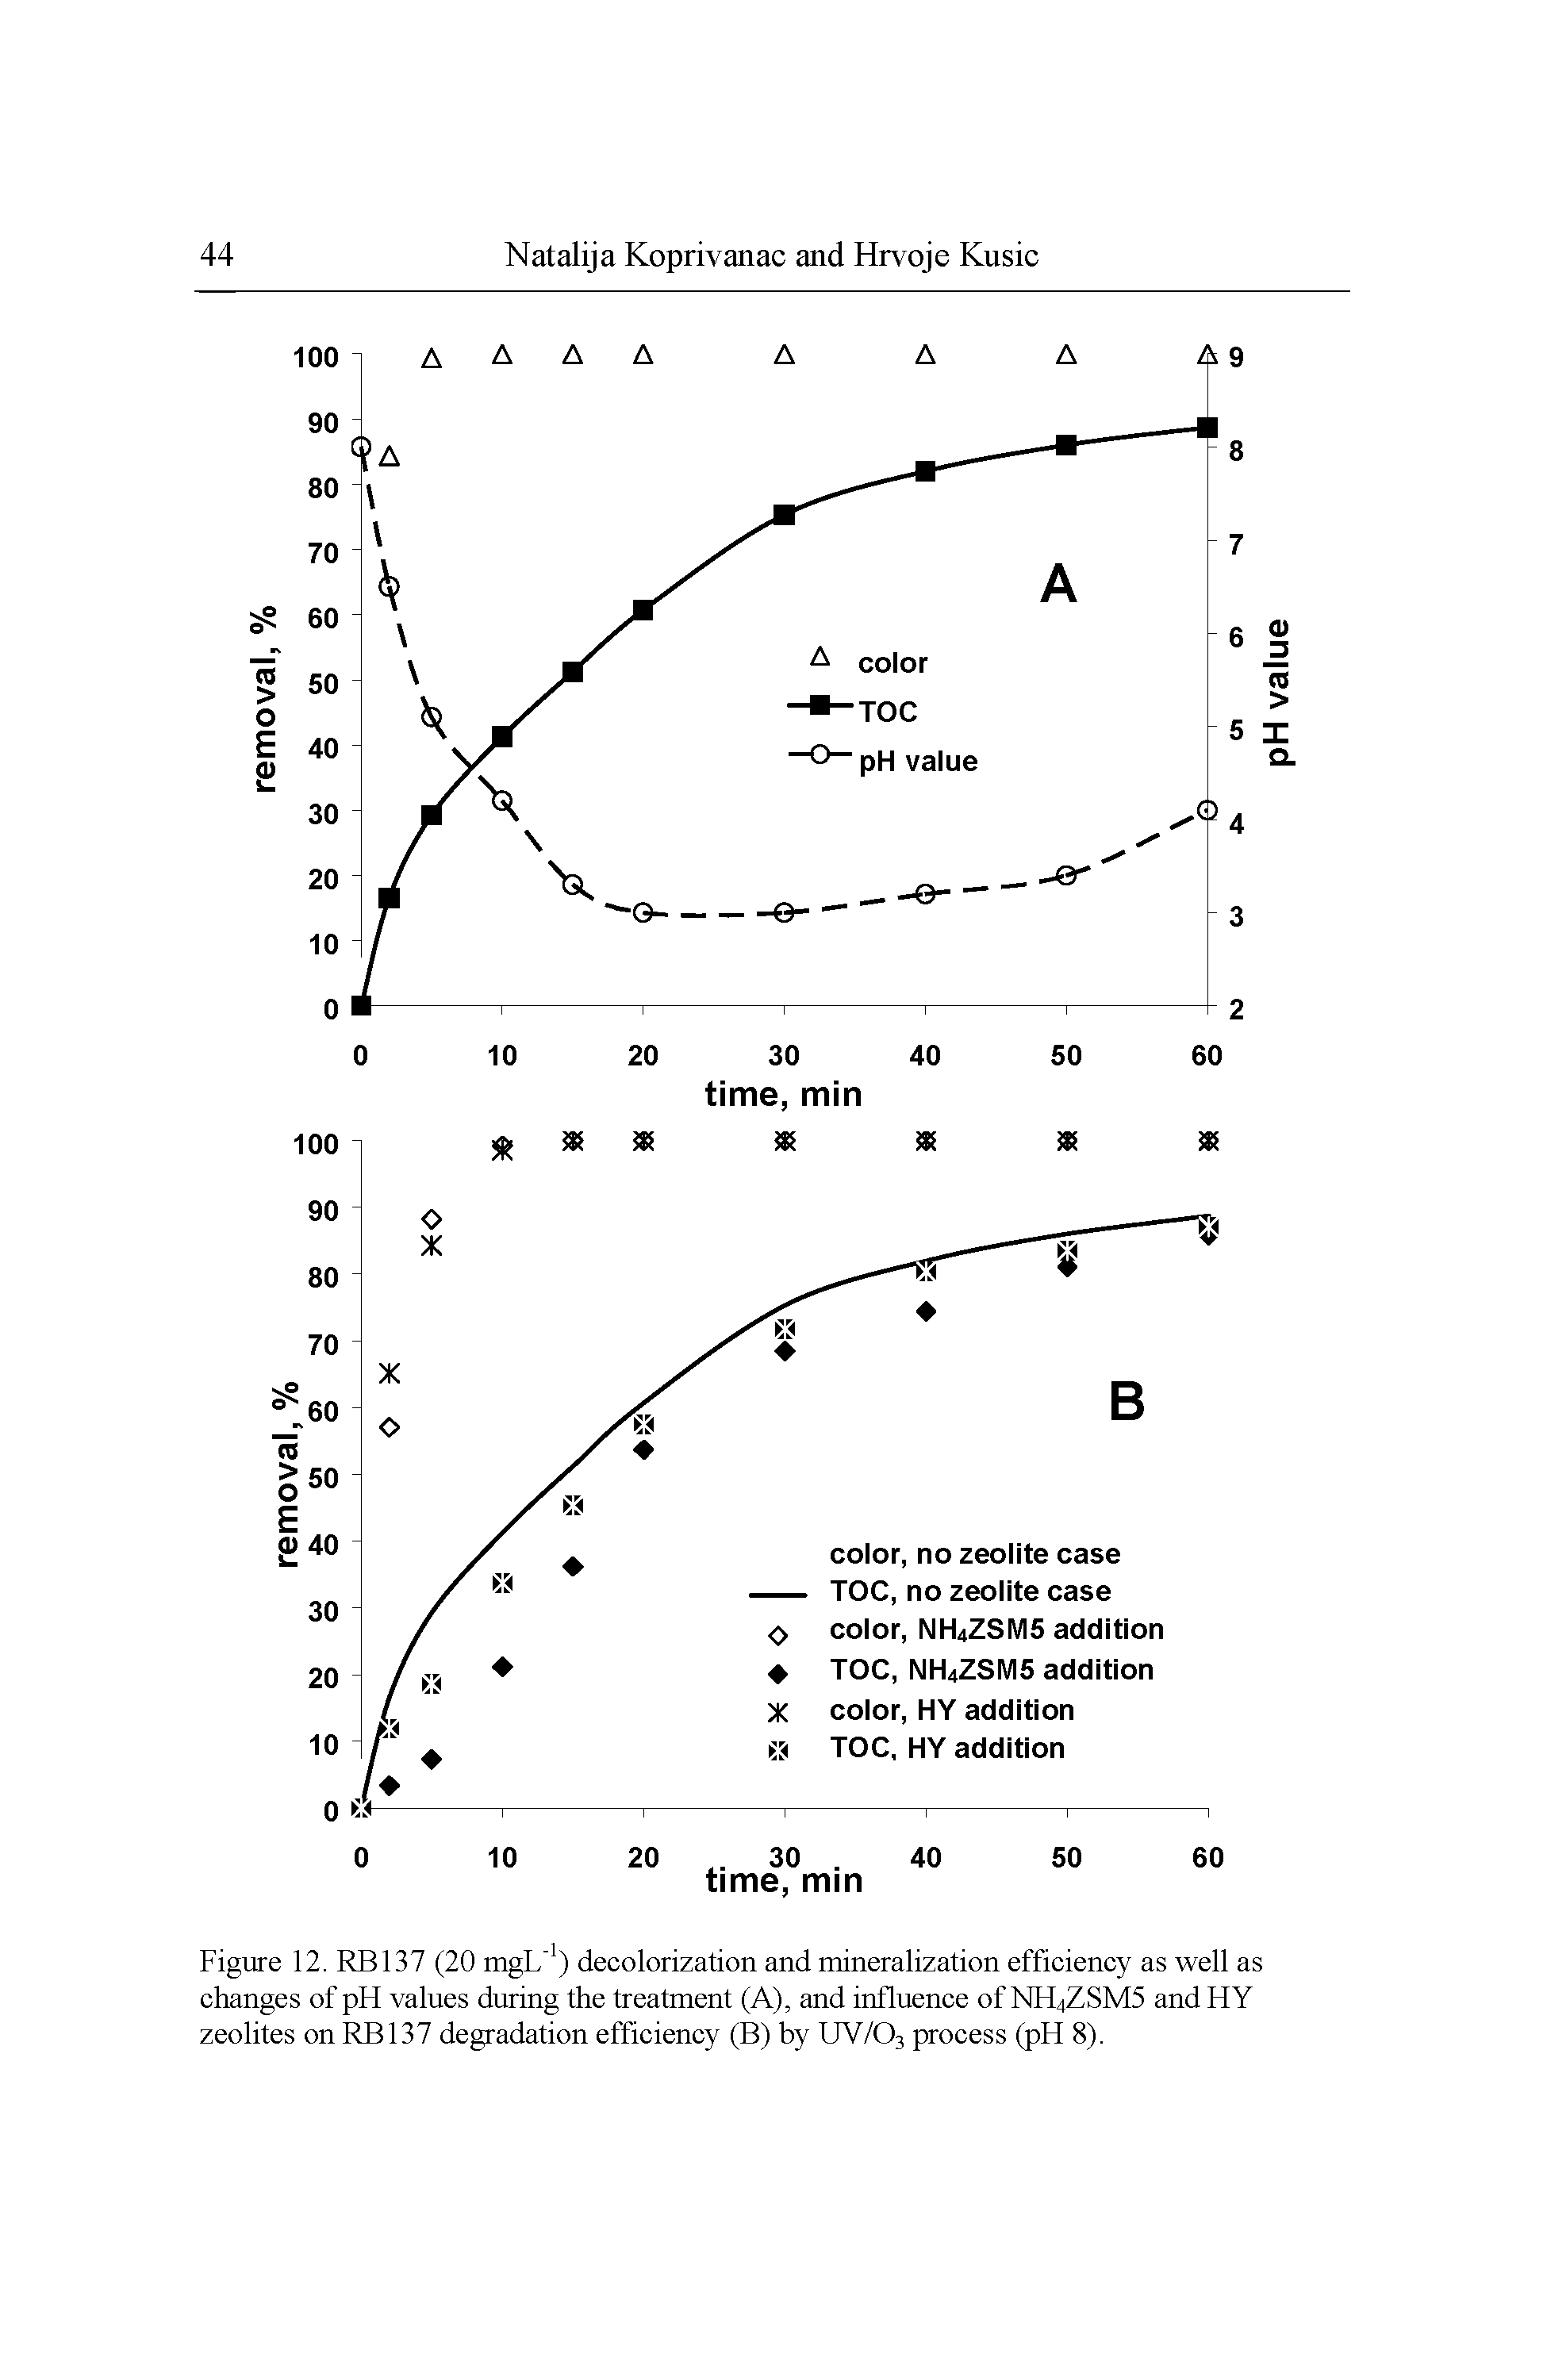 Figure 12. RB137 (20 mgL ) decolorization and mineralization efficiency as well as changes of pFI values during the treatment (A), and influence of NFI4ZSM5 and FIY zeolites on RB137 degradation efficiency (B) by UV/O3 process (pFI 8).